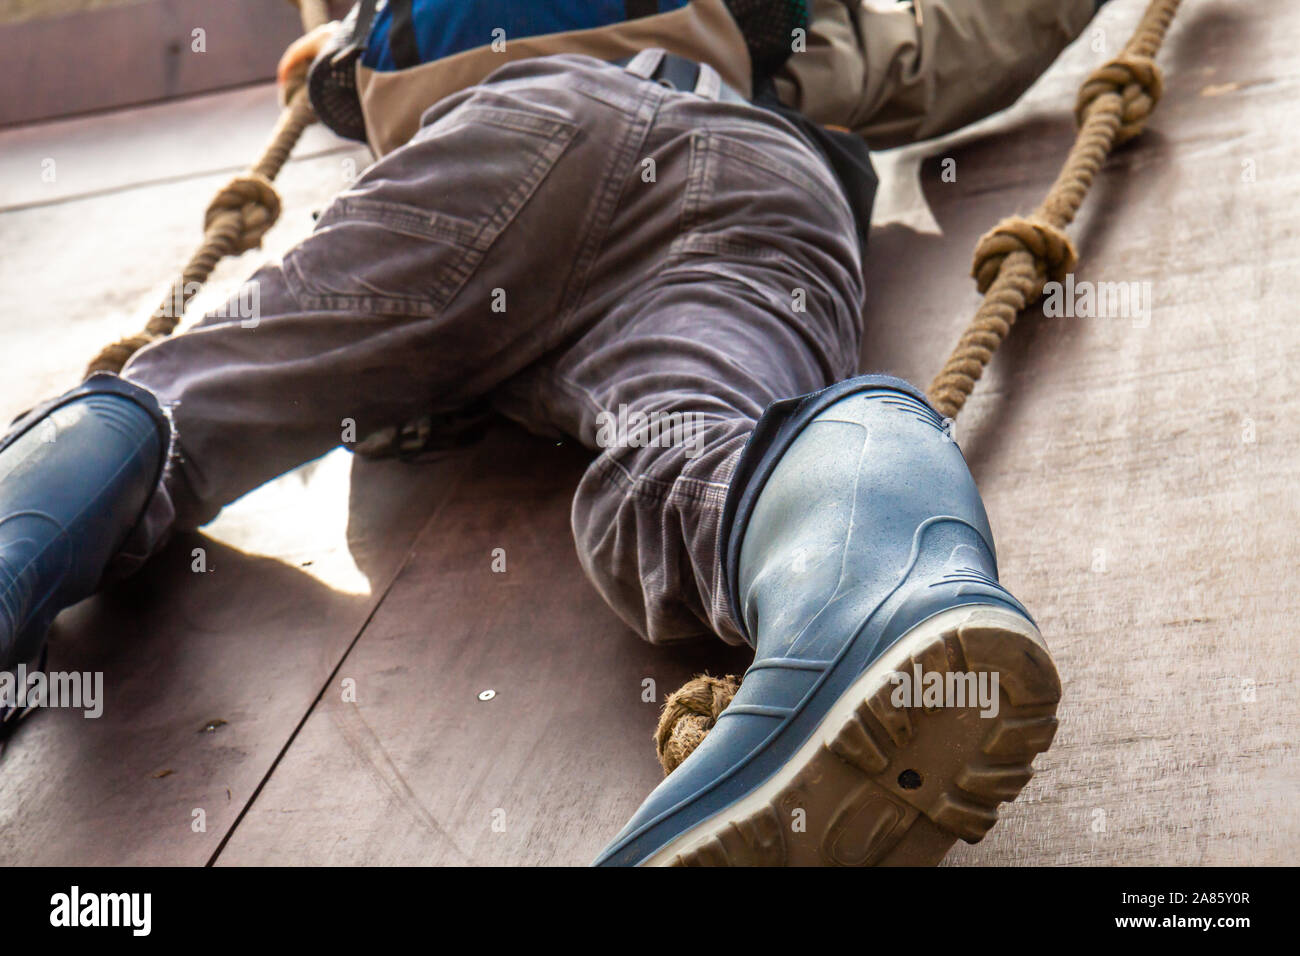 Young boy in wellys climbing up a wall with ropes. Stock Photo